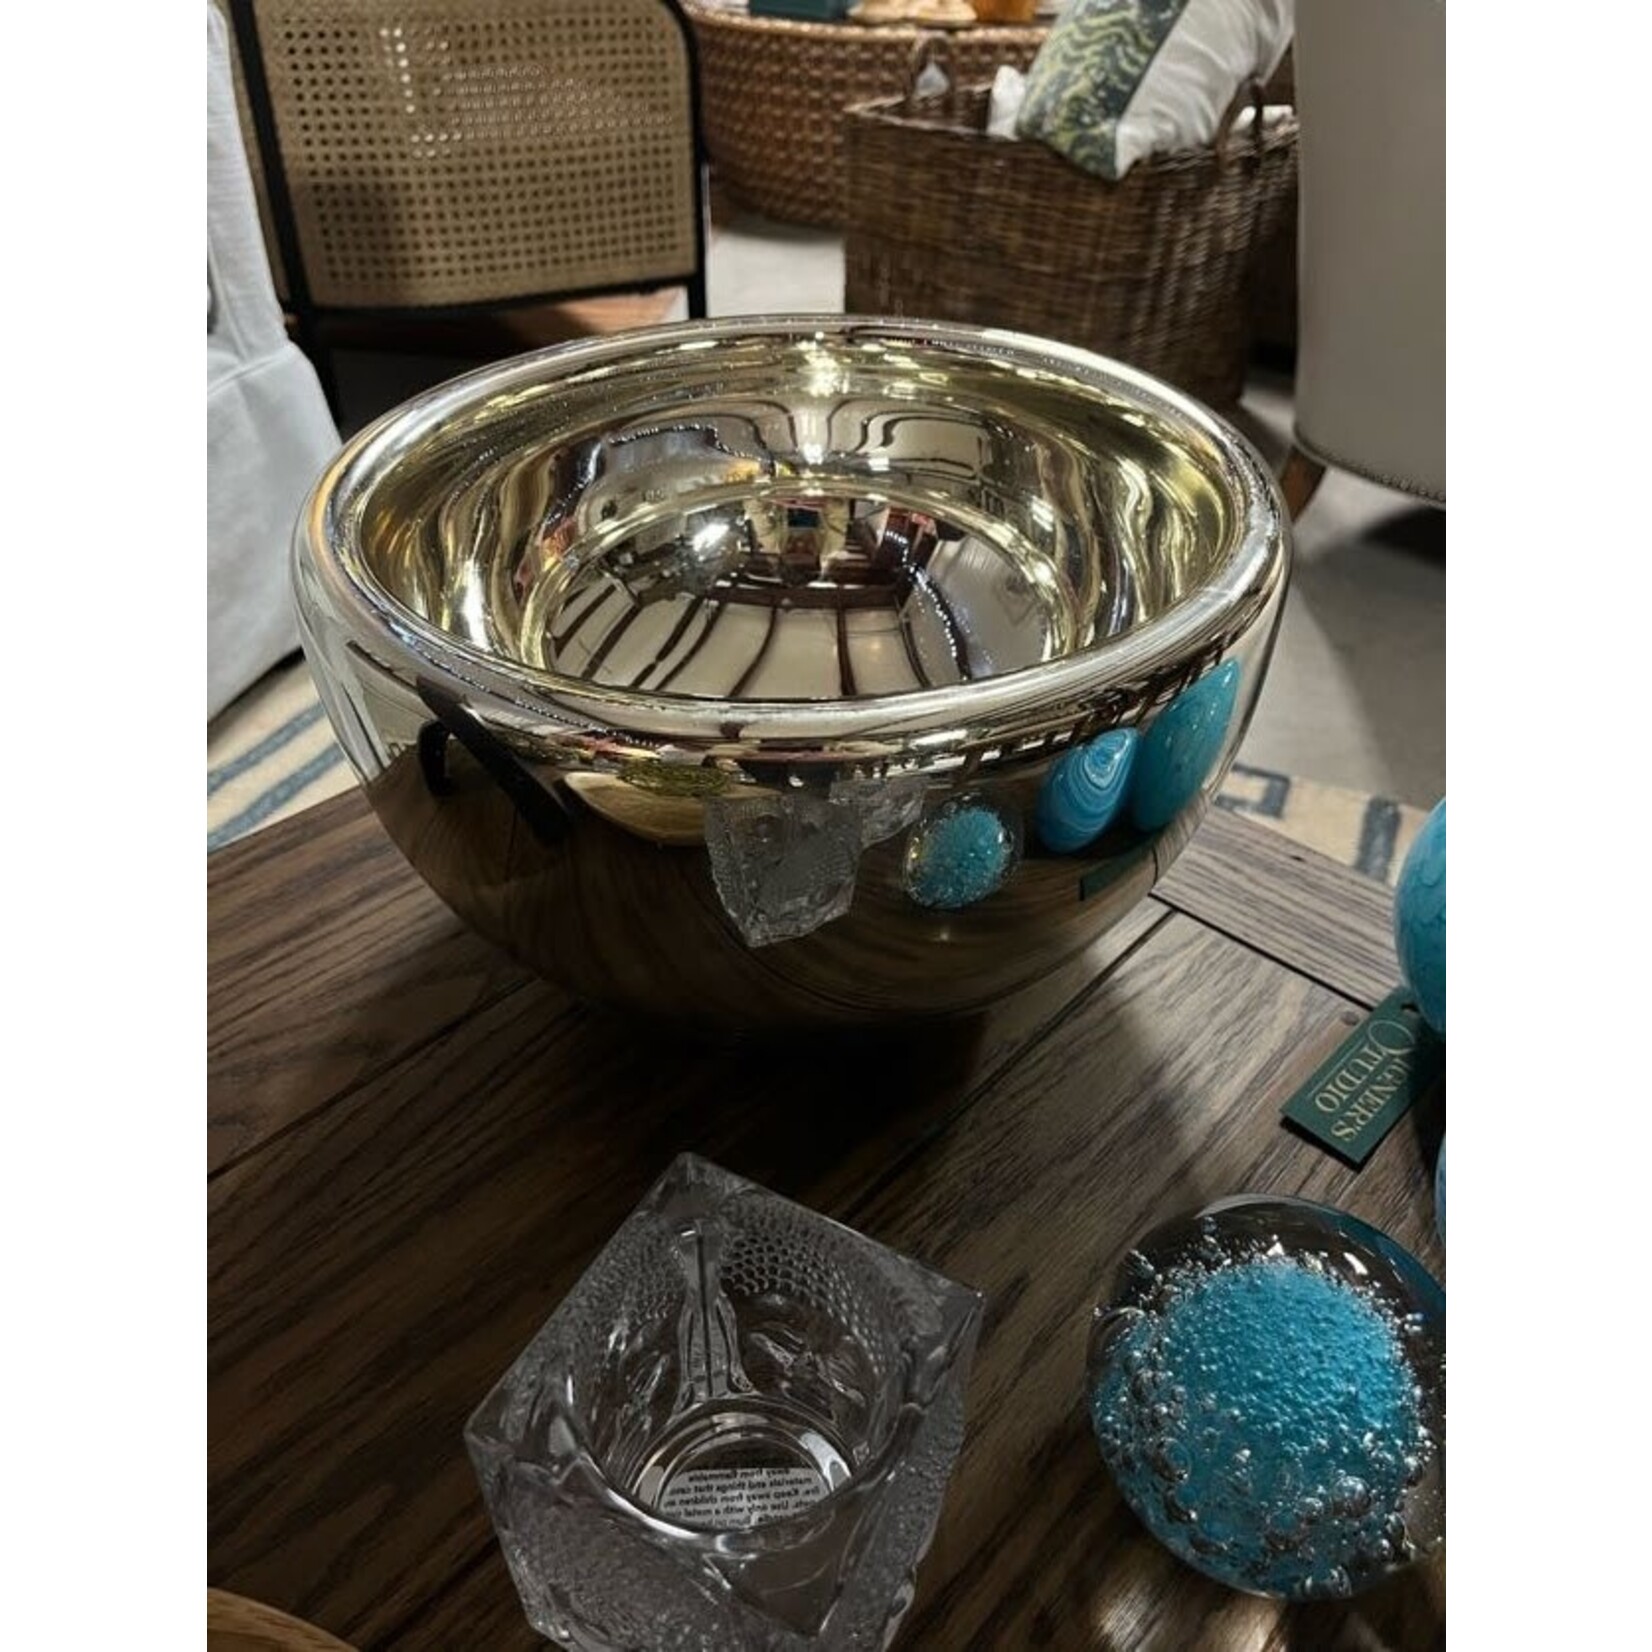 Worldly Goods Hi Bowl Silver Plated 13"